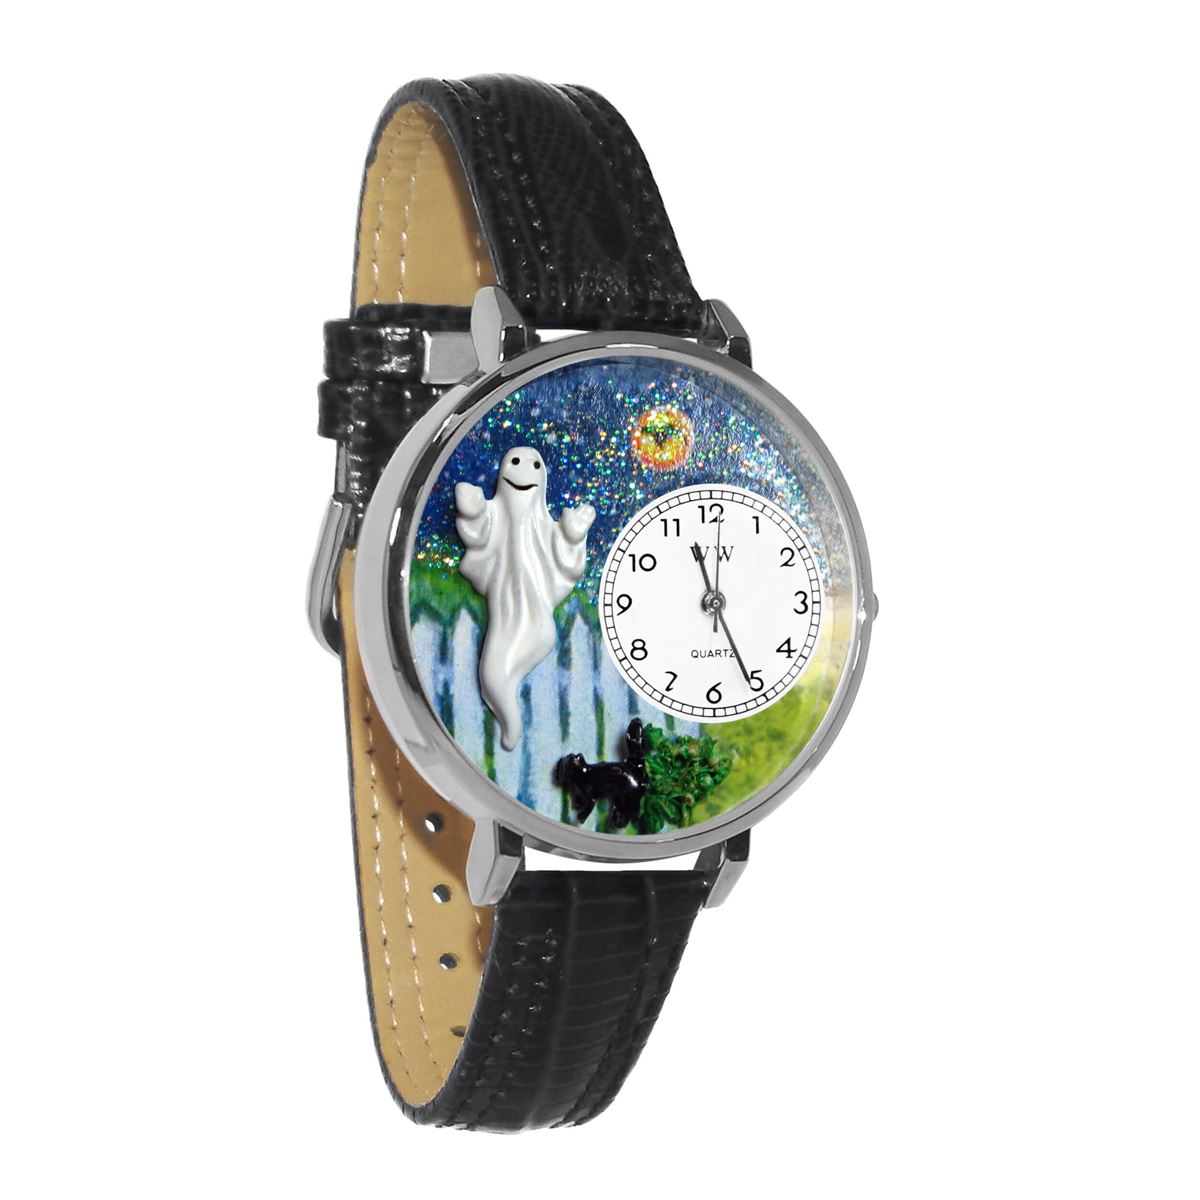 Whimsical Gifts | Halloween Ghost 3D Watch Large Style | Handmade in USA | Holiday & Seasonal Themed | Halloween | Novelty Unique Fun Miniatures Gift | Silver Finish Black Leather Watch Band